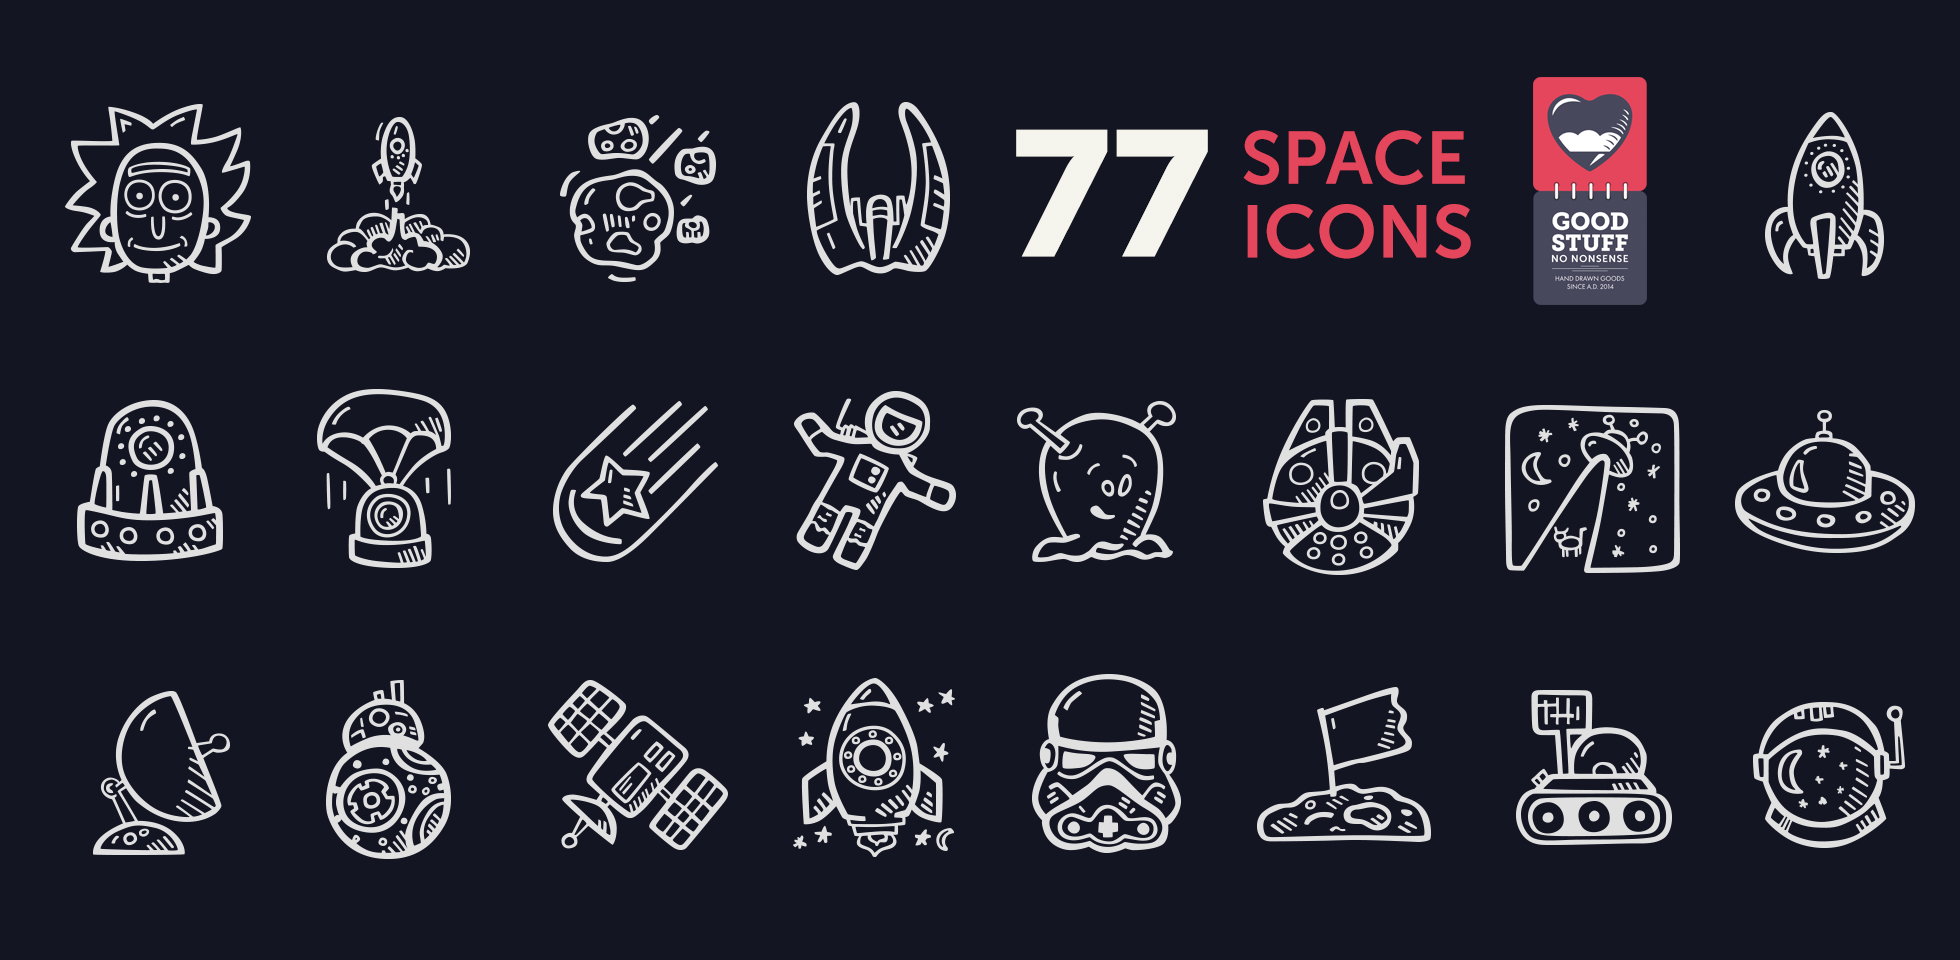 Free Download: Space Icons